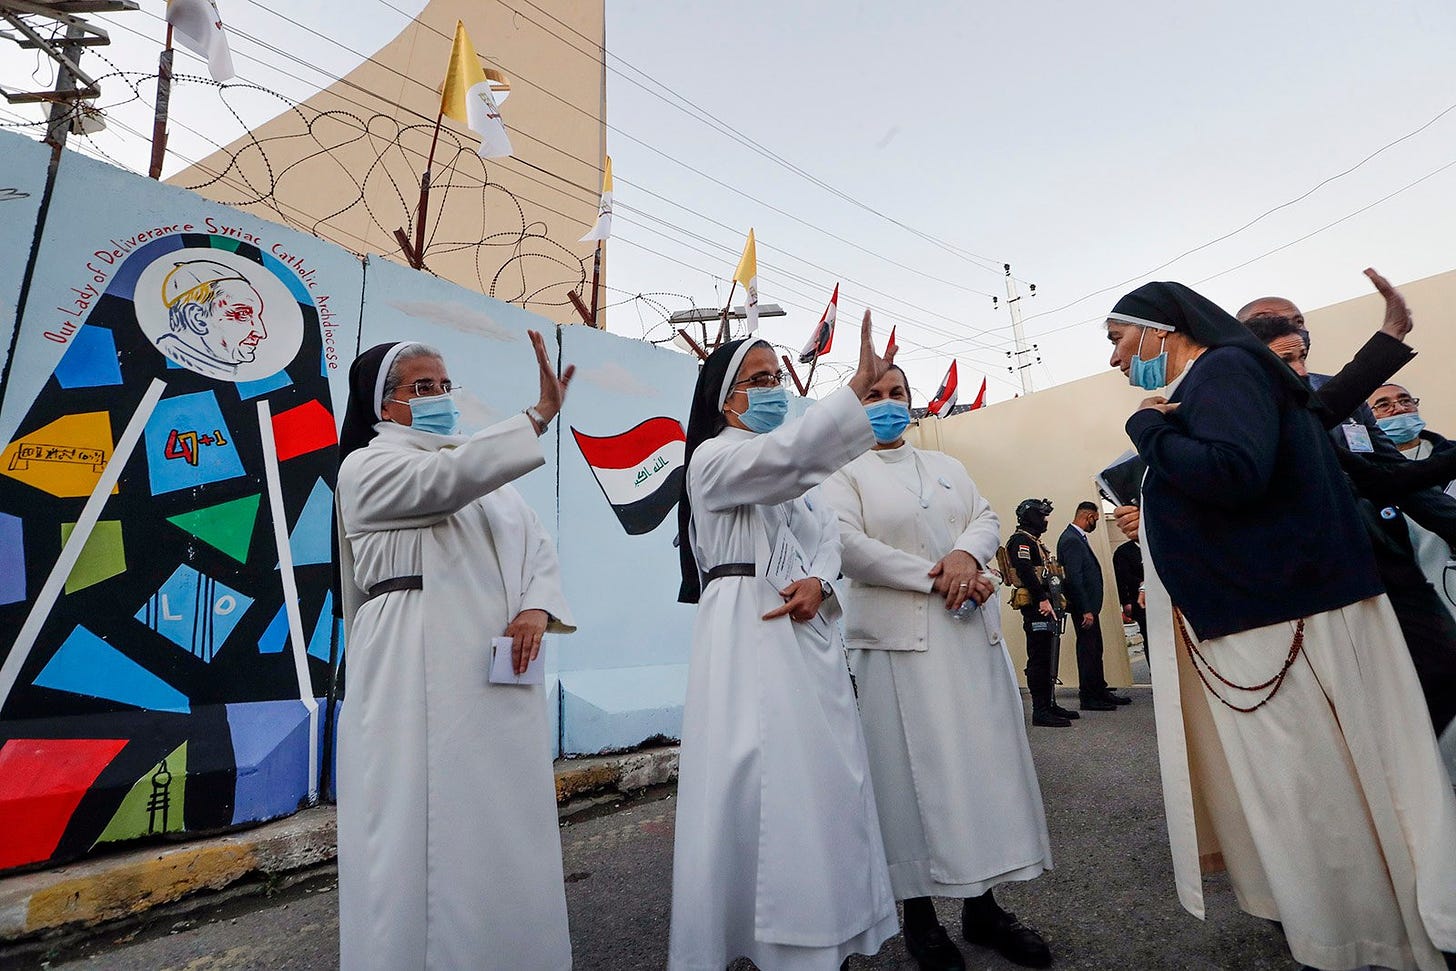 Nuns waves as Pope Francis leaves the Sayidat al-Nejat (Our Lady of Salvation) Cathedral, in Baghdad, Iraq, Friday, March 5, 2021. Pope Francis has arrived in Iraq to urge the country's dwindling number of Christians to stay put and help rebuild the country after years of war and persecution, brushing aside the coronavirus pandemic and security concerns. (AP Photo/Andrew Medichini)